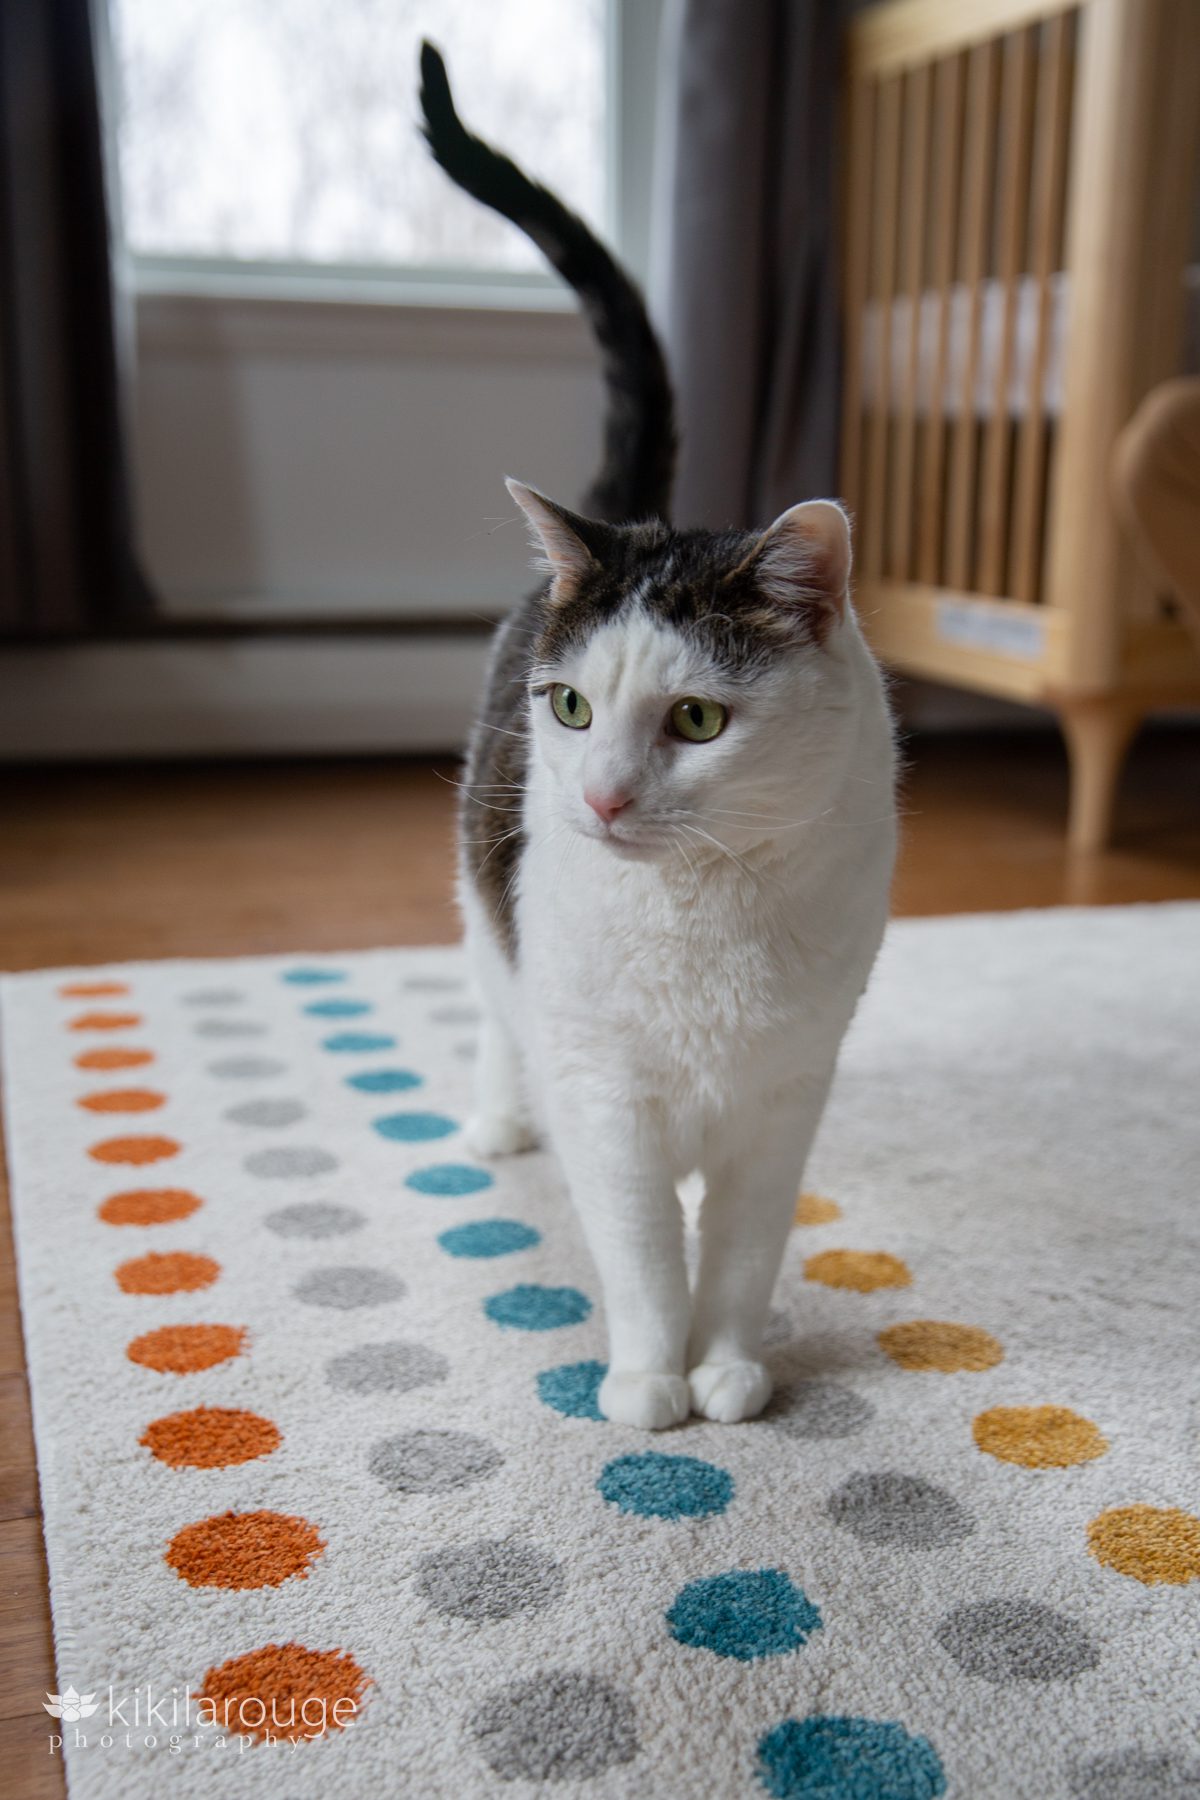 Gray and white cat walking on a polka dot rug